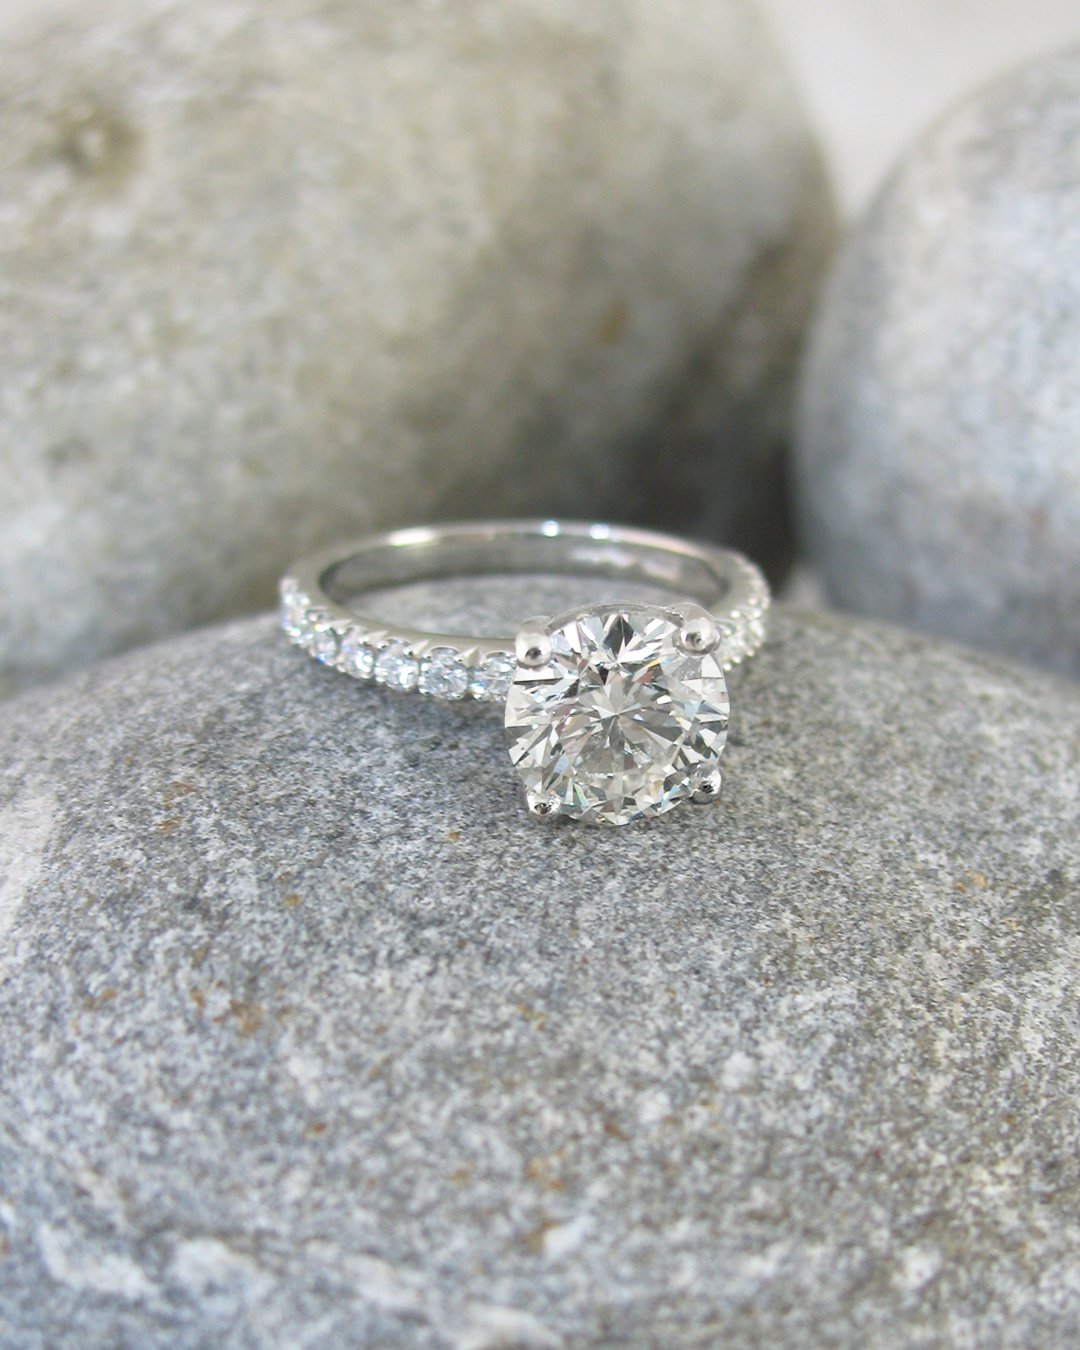 A traditional round brilliant cut diamond engagement ring